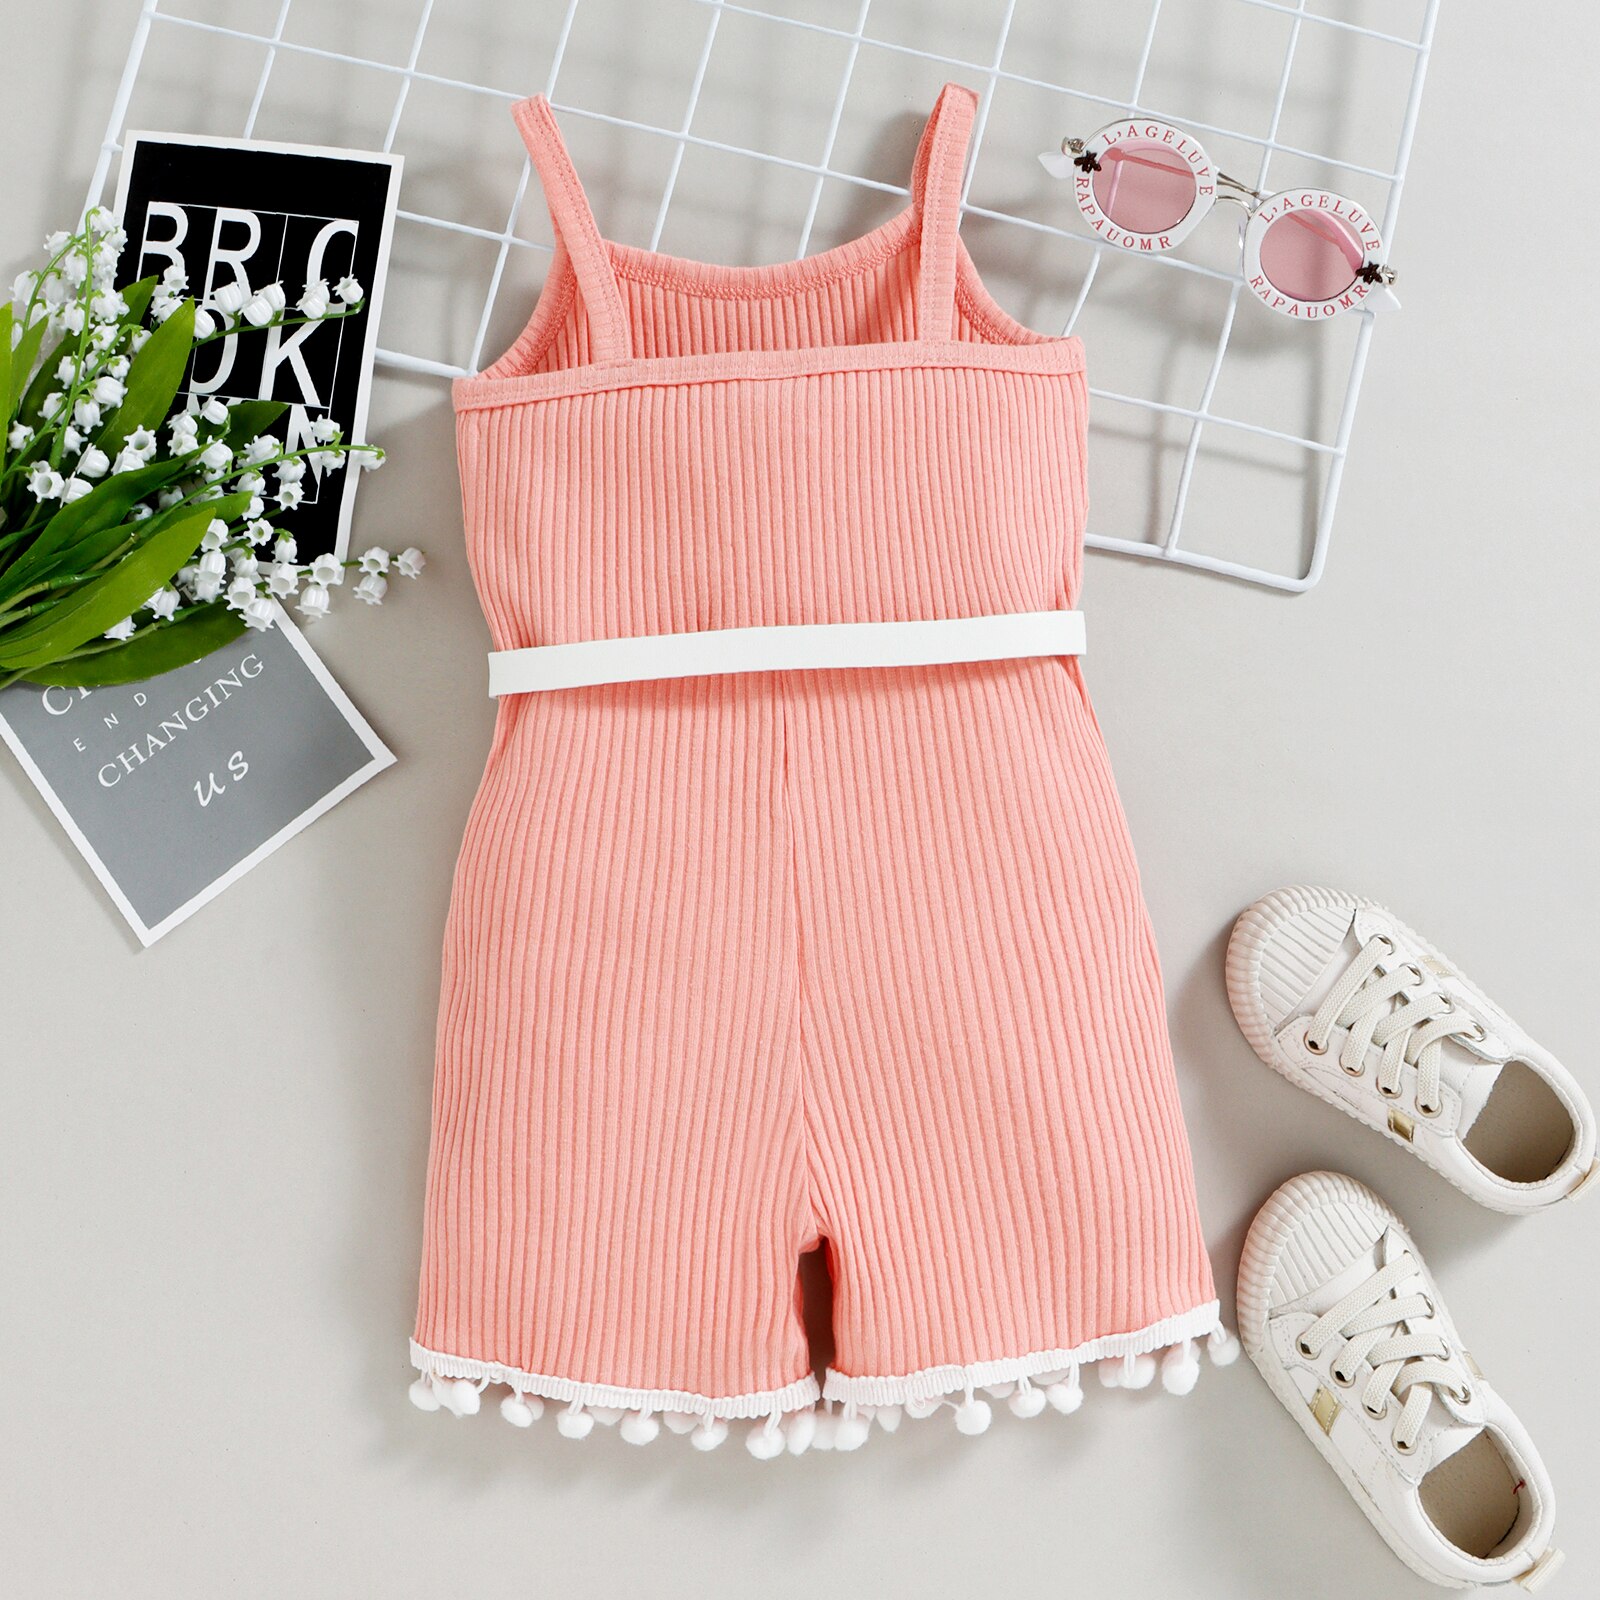 Kids-Summer-Outfit-Contrast-Color-U-Neck-Sleeveless-Playsuit-Waist-Bag-for-Baby-Girls-Pink-Gray-2